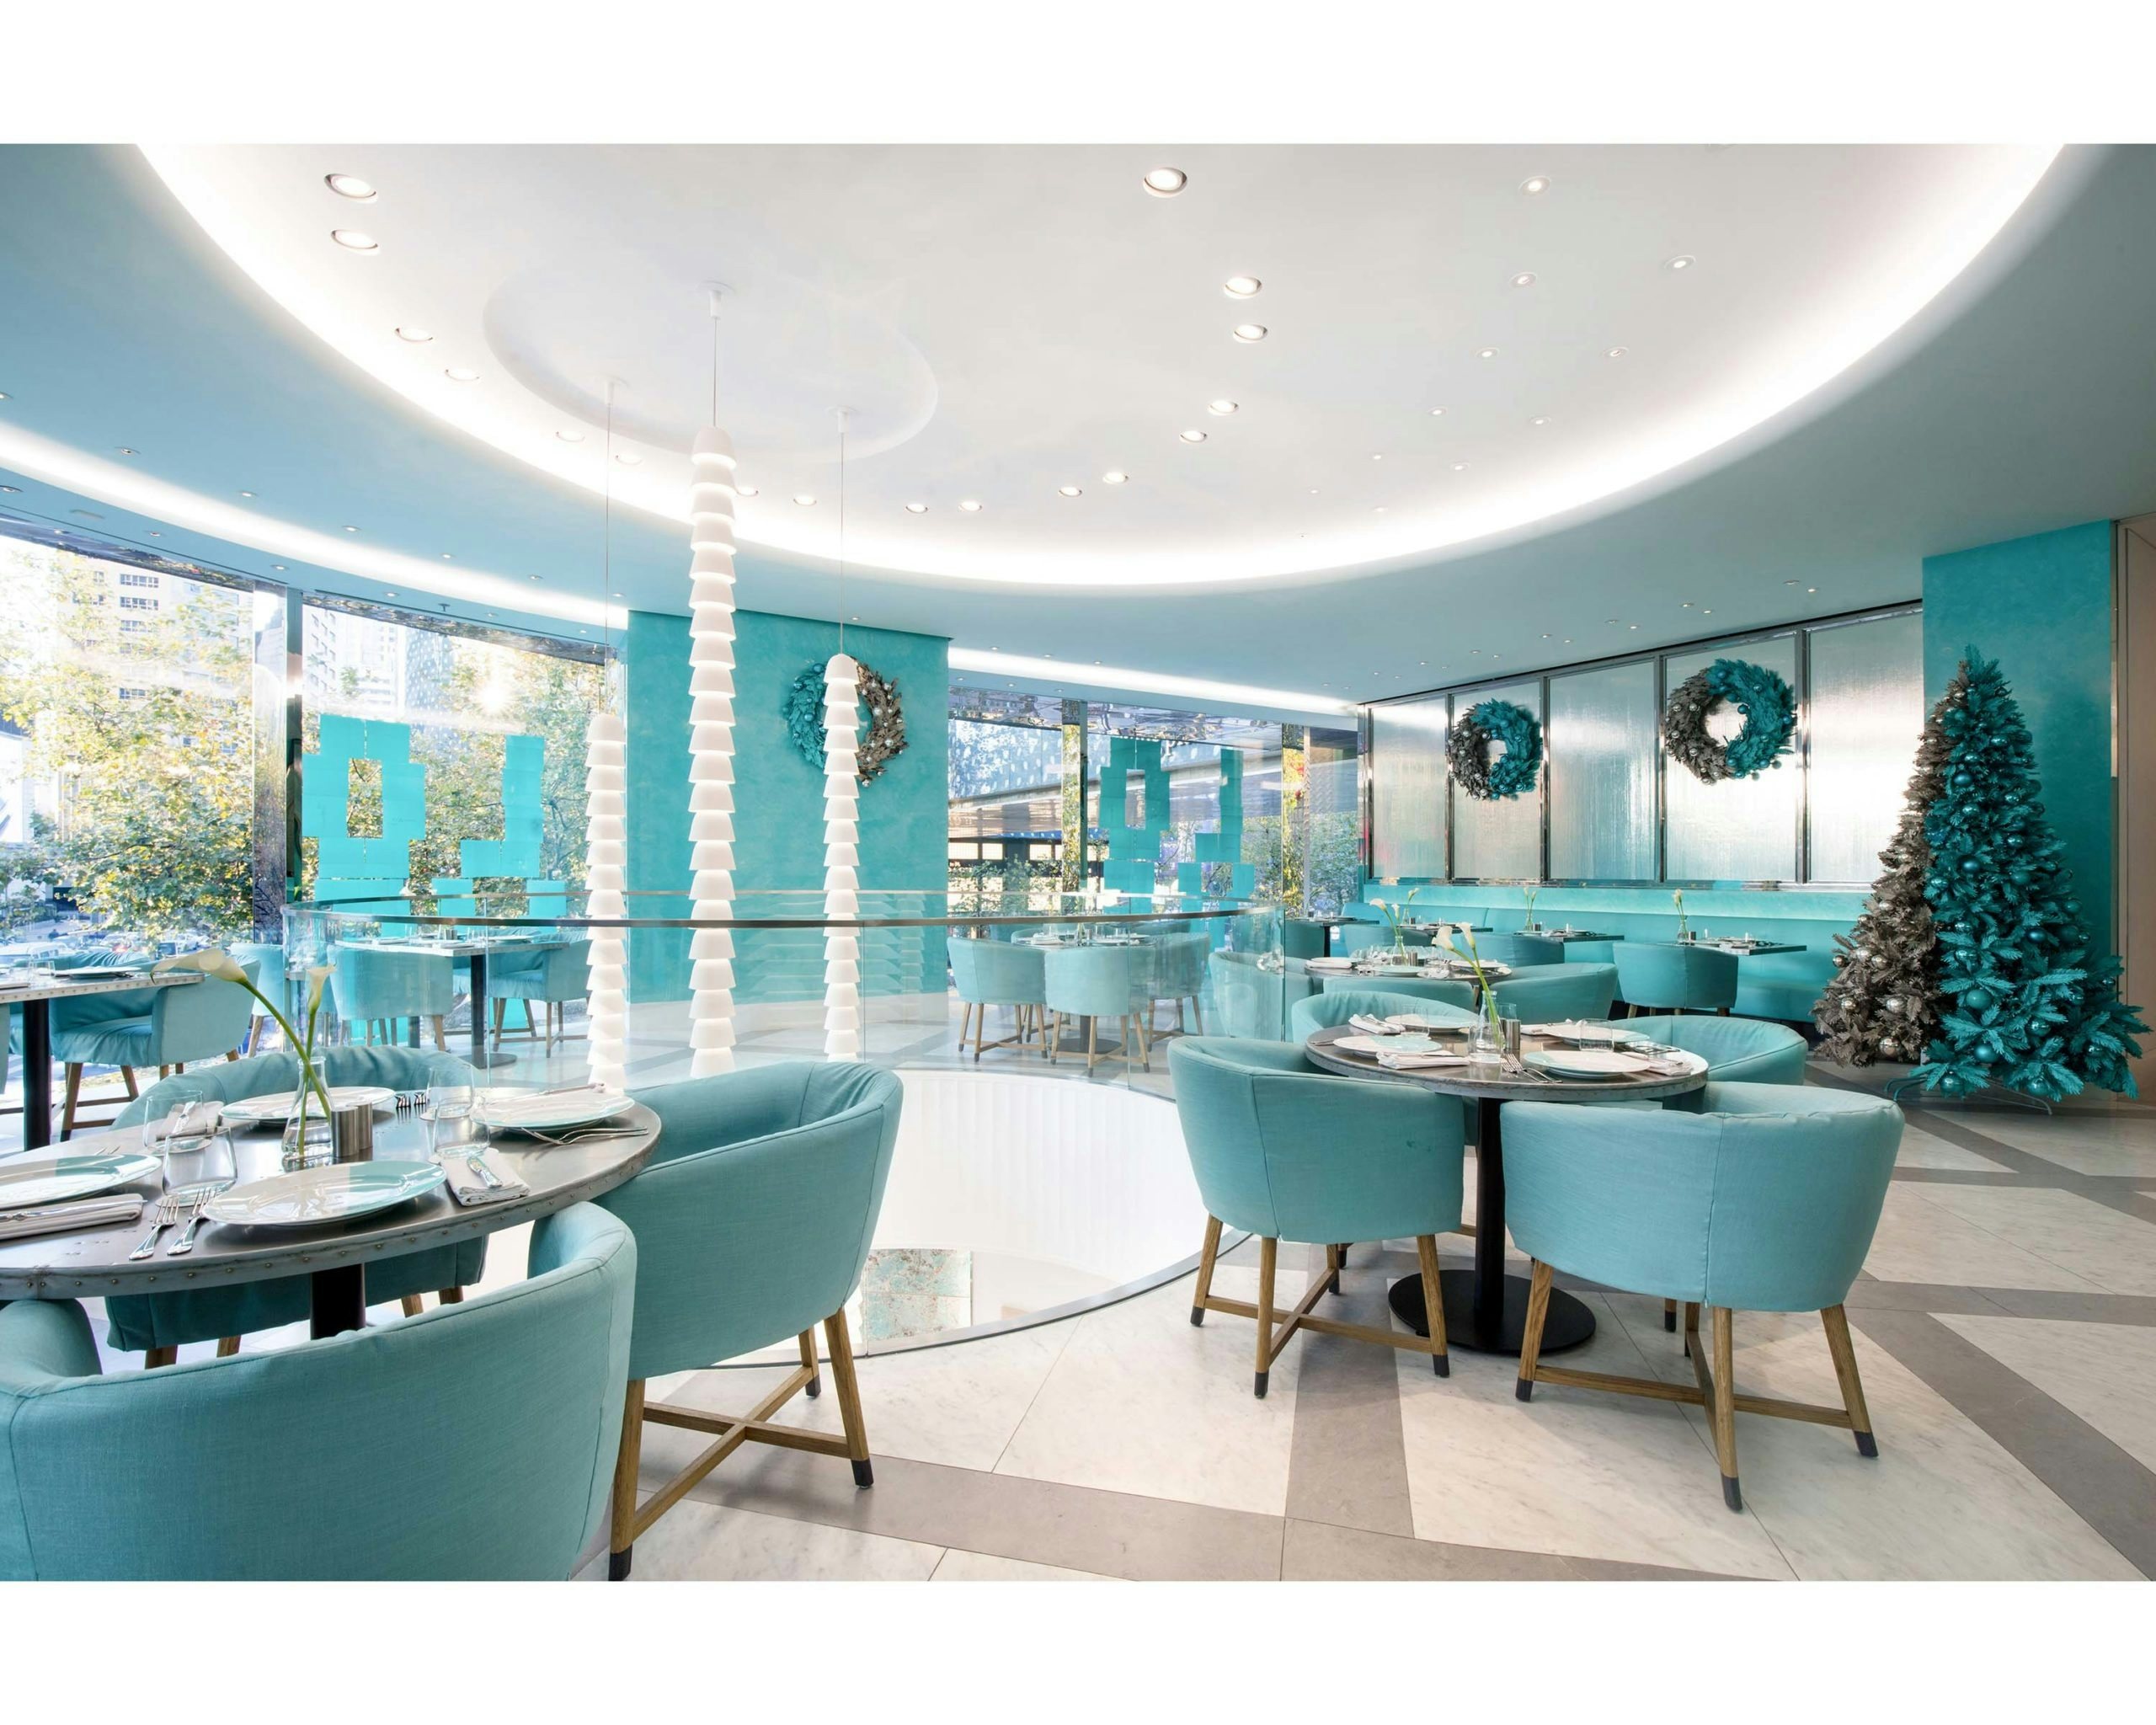 In 2019, Tiffany opened a Blue Box Cafe at its Shanghai flagship store. Photo: Tiffany & Co.